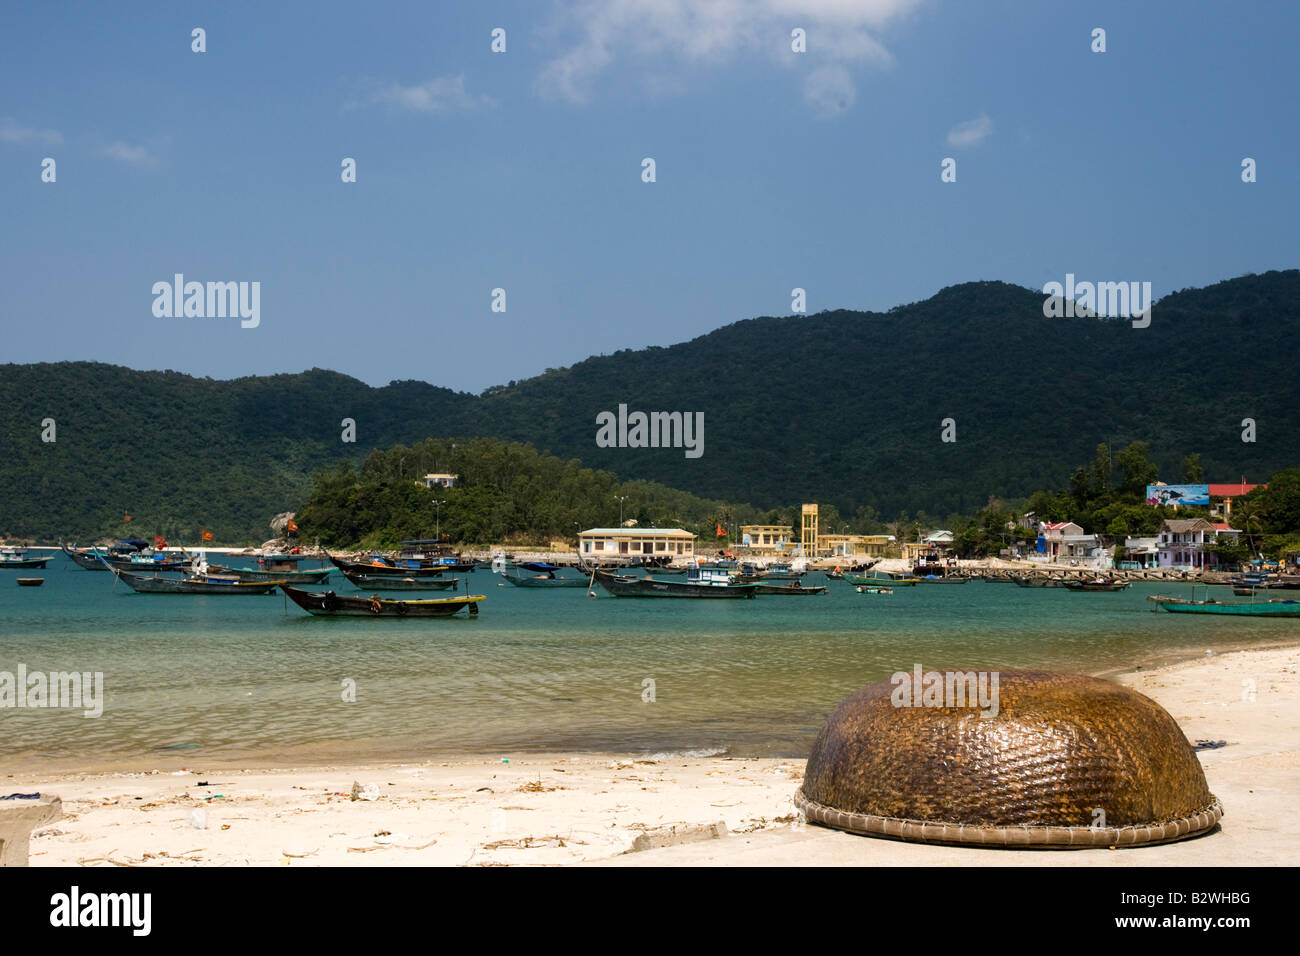 Traditional round woven coracle Cham Island off historic Hoi An Vietnam Stock Photo